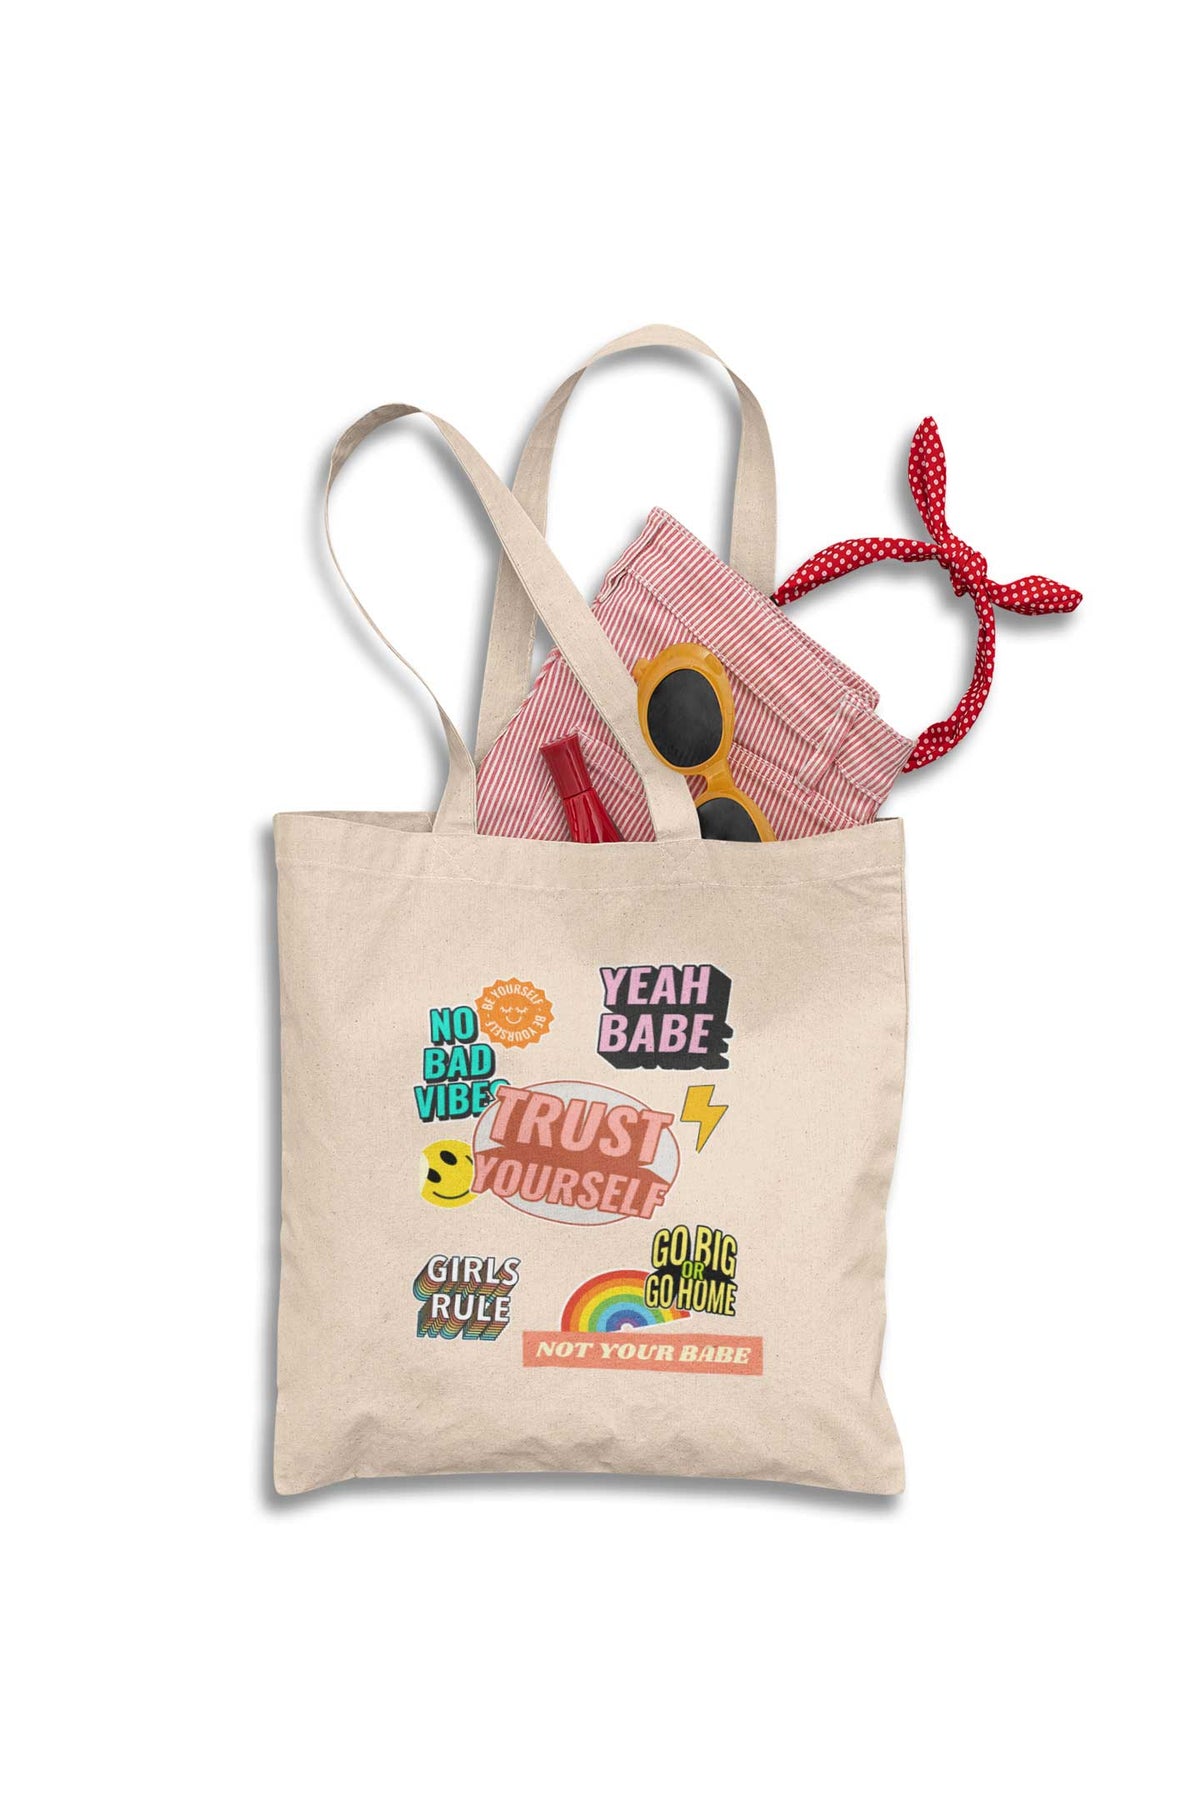 Girls Rules stickers tote bag